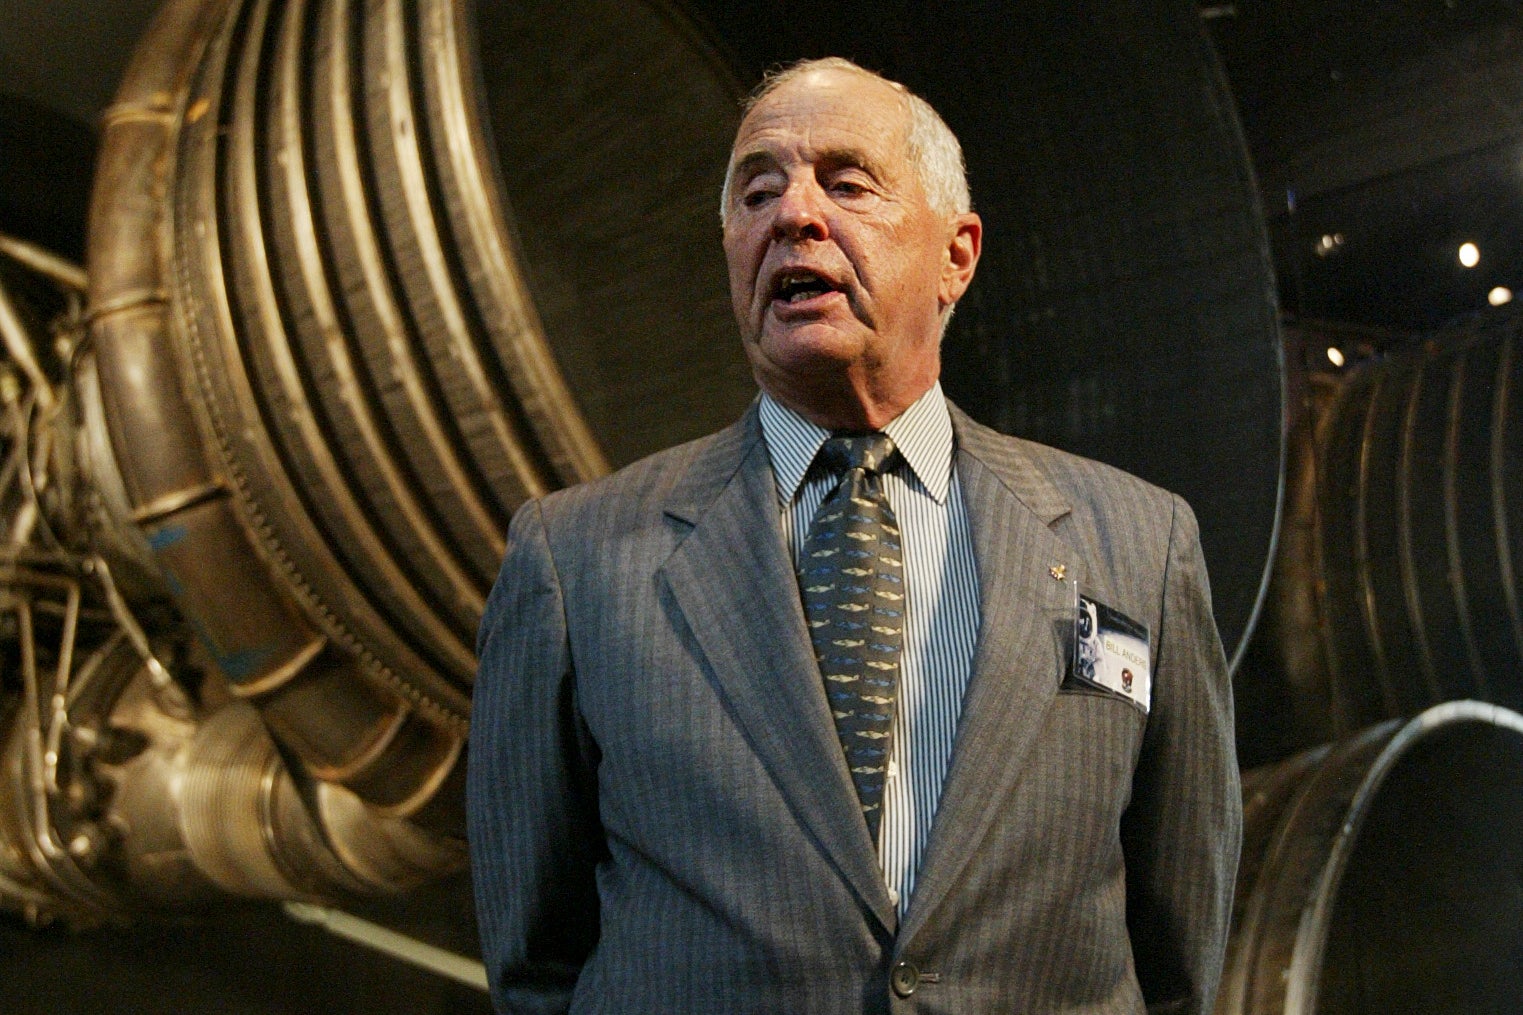 Apollo 8 Lunar Module Pilot Gen. William Anders, speaks to reporters in front of the Saturn 5 Aft End, the F-1 rocket engines of the first stage of the Apollo 11/Saturn 5 launch vehicle July 20, 2004, in Washington